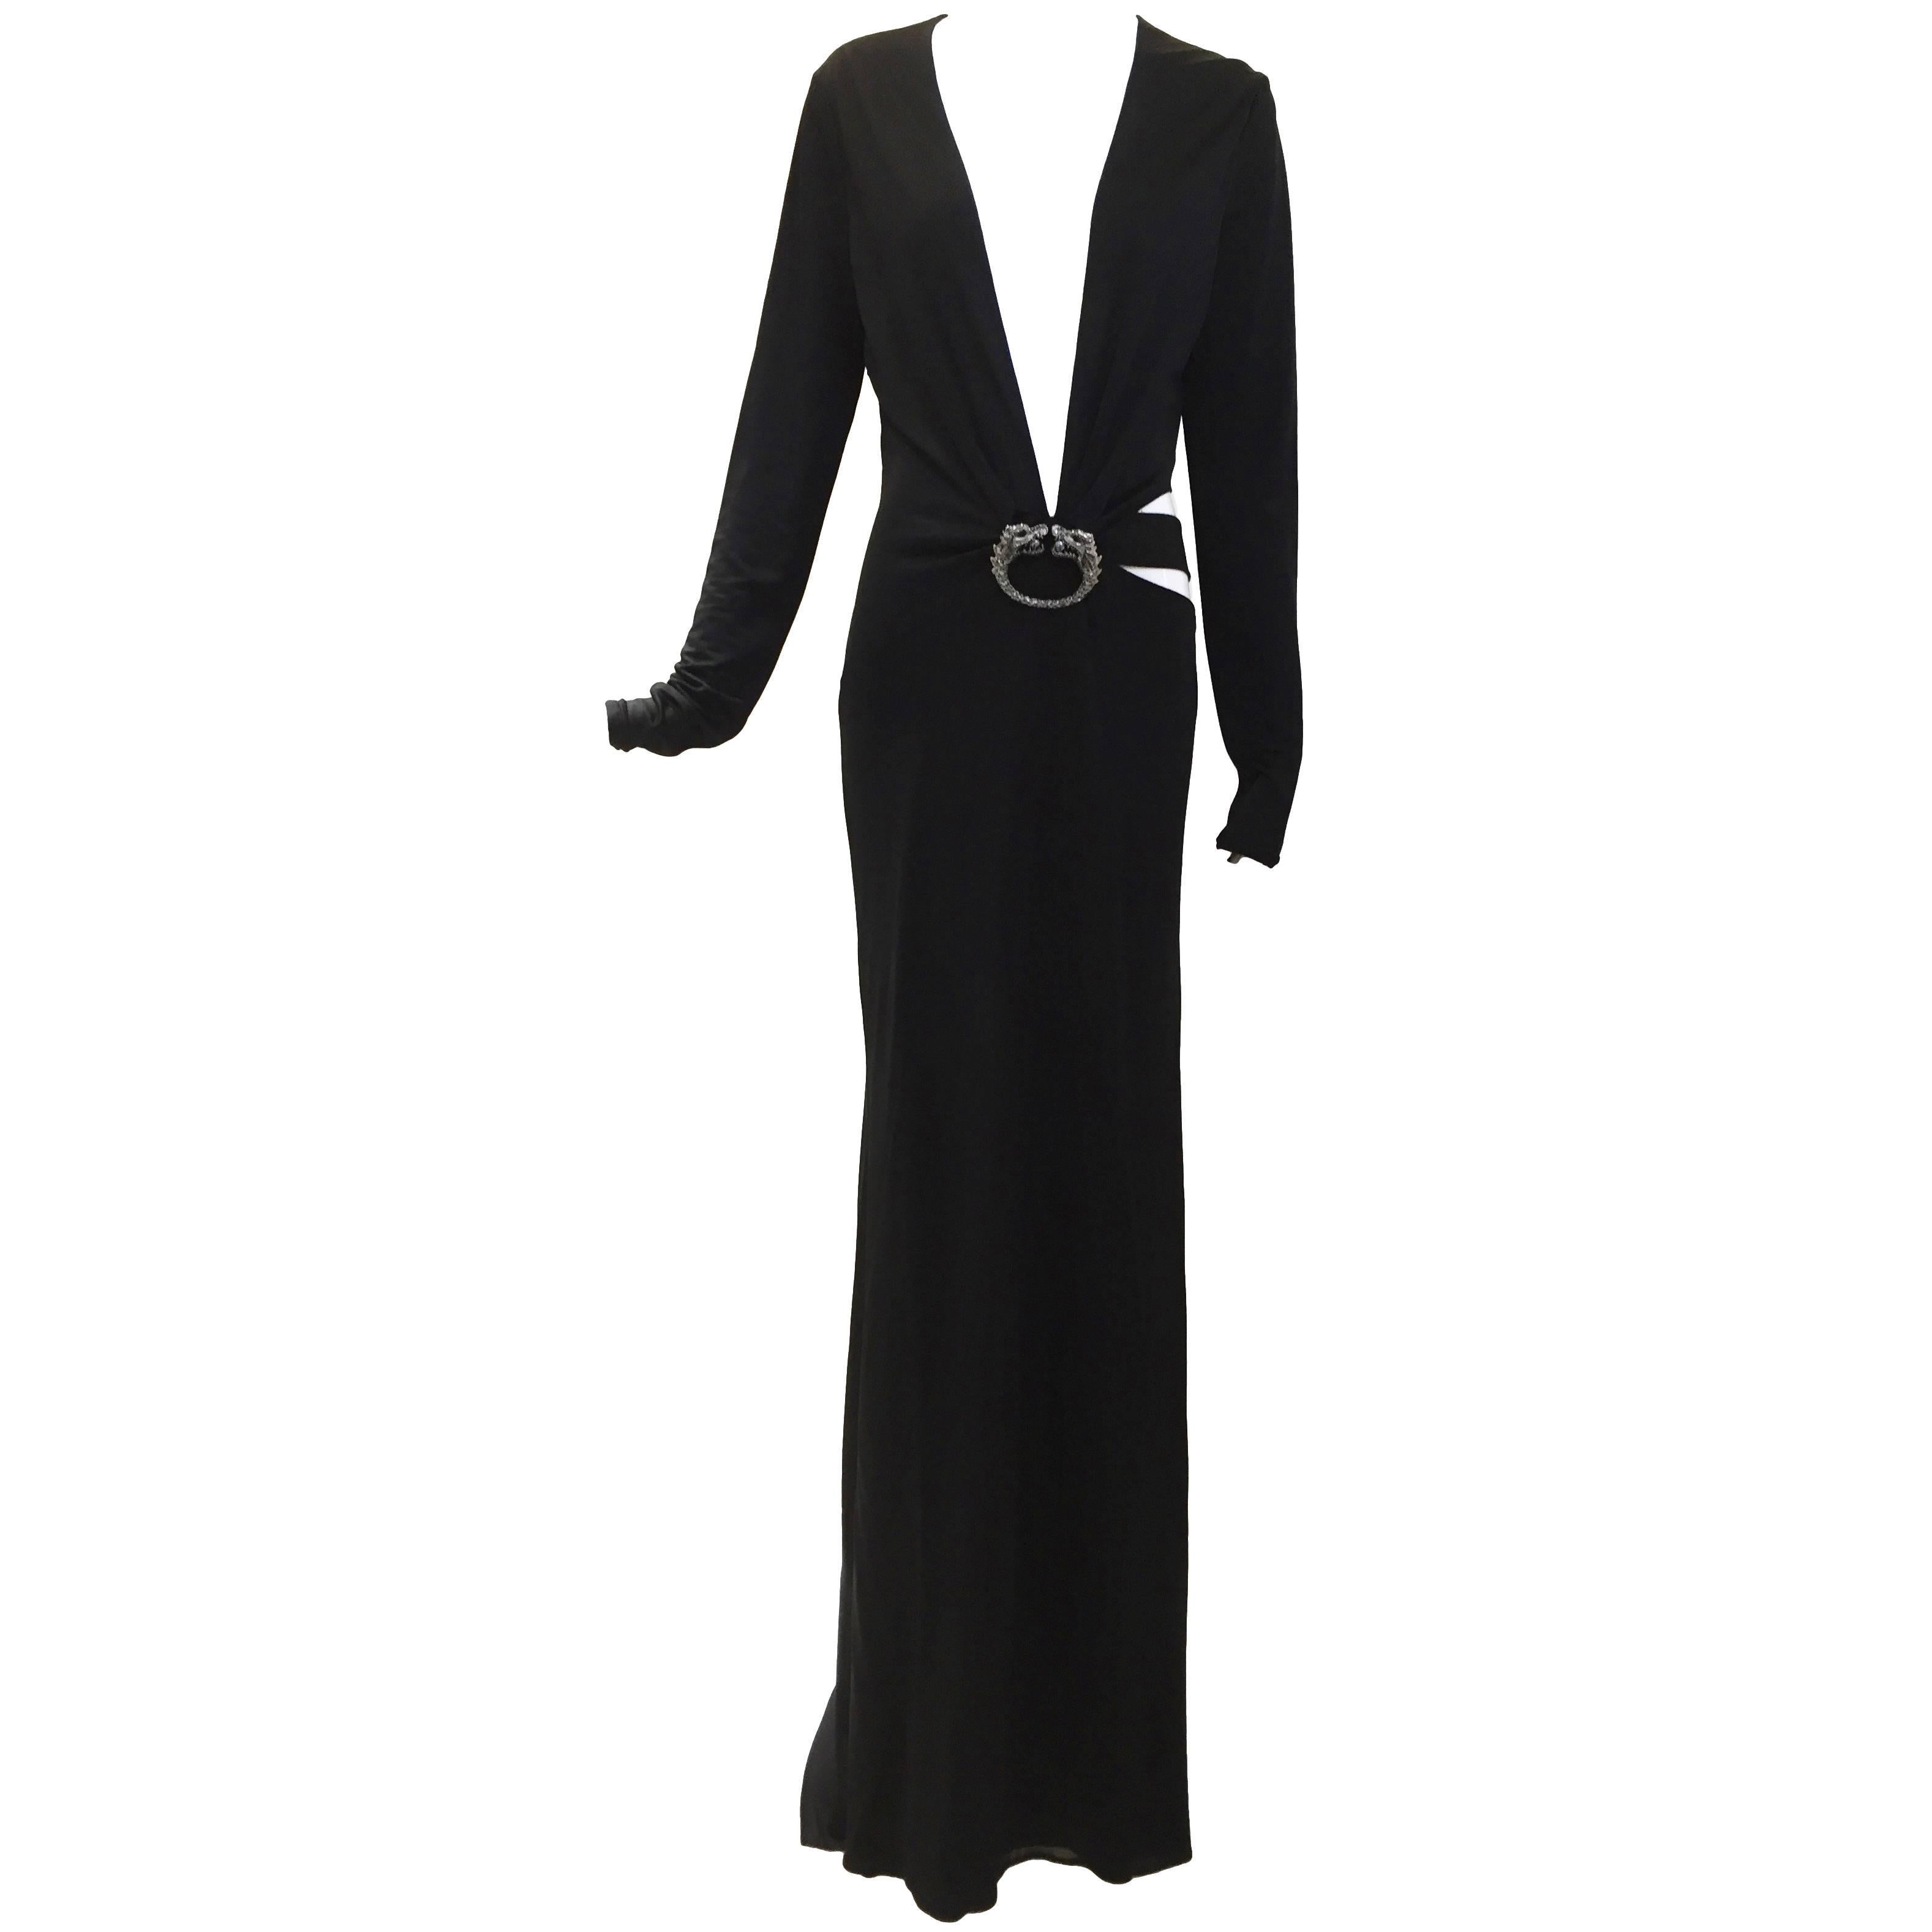 Iconic Gucci by Tom Ford black silk jersey gown 